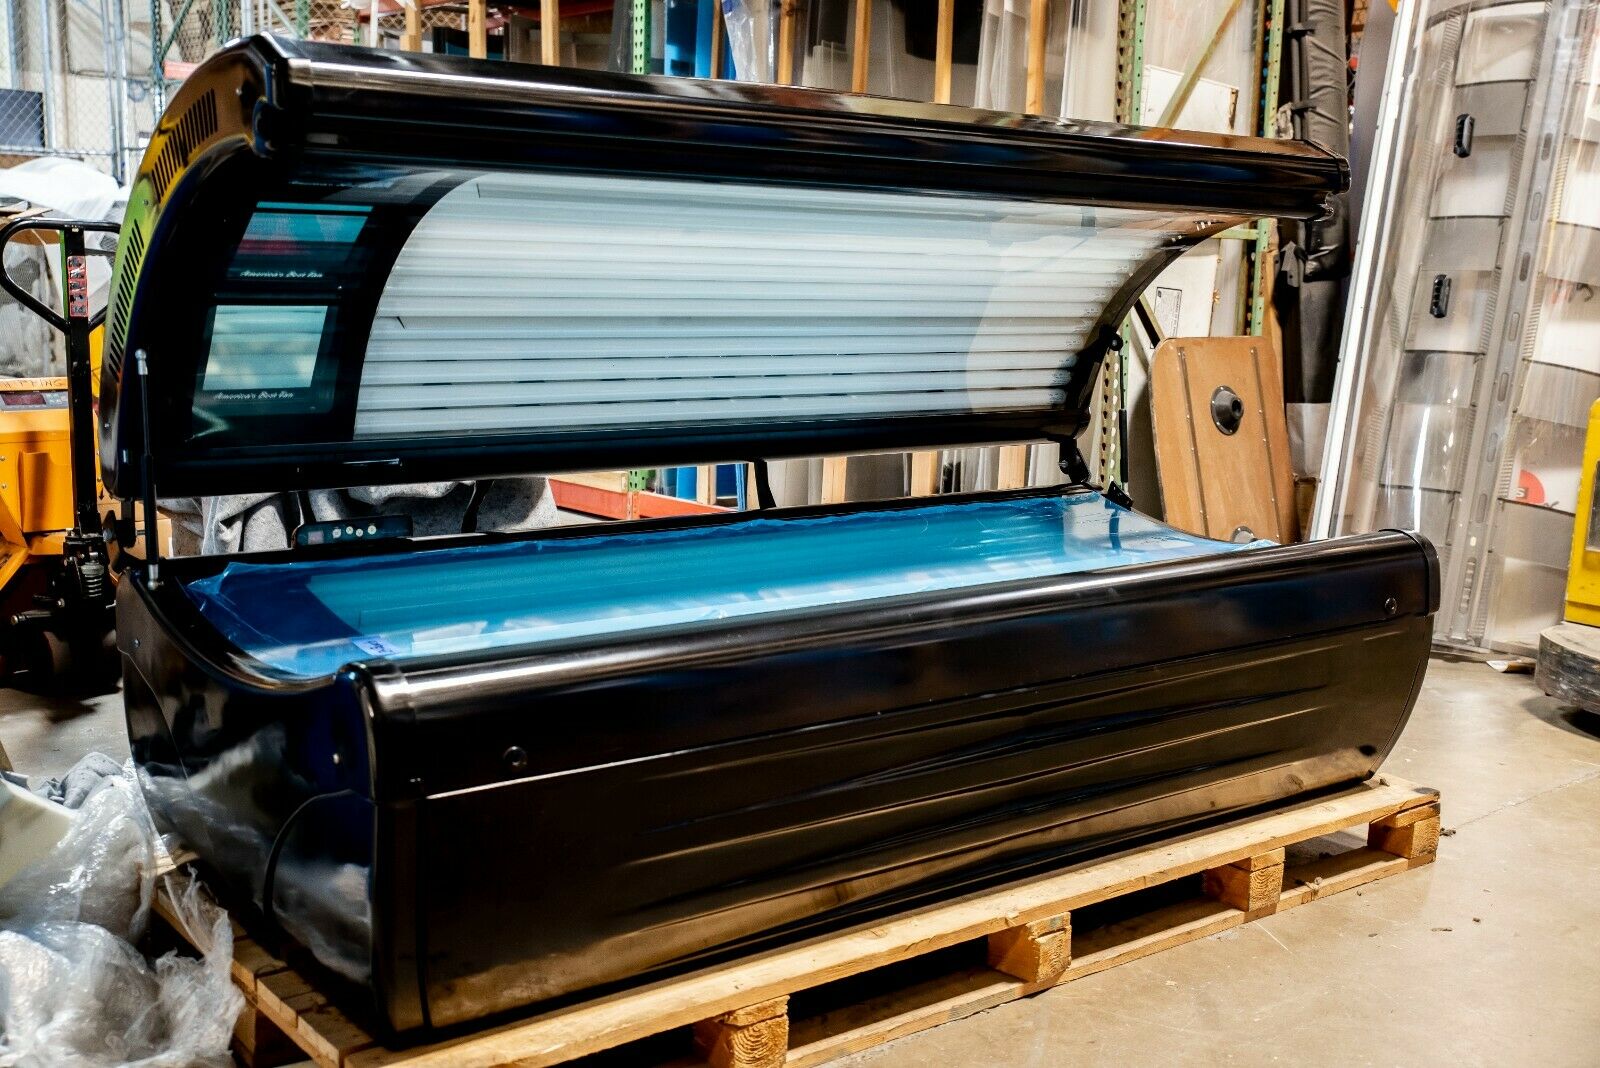 Tanning Bed Heartland Ovation 134/3 - Pre-owned